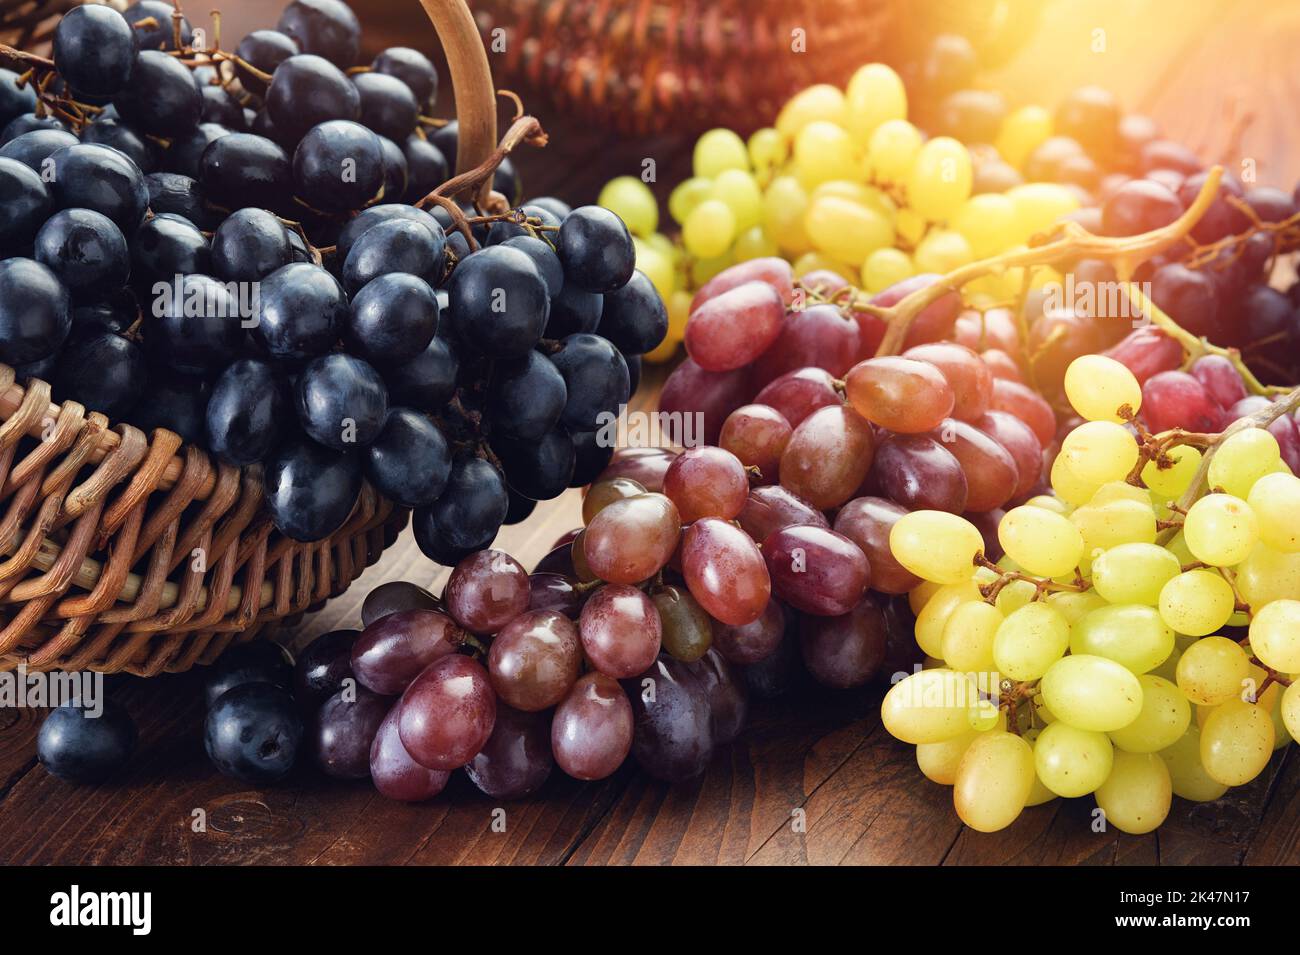 Black, green and purple grapes. Ripe bunches of grapes in a basket and on the table. Stock Photo